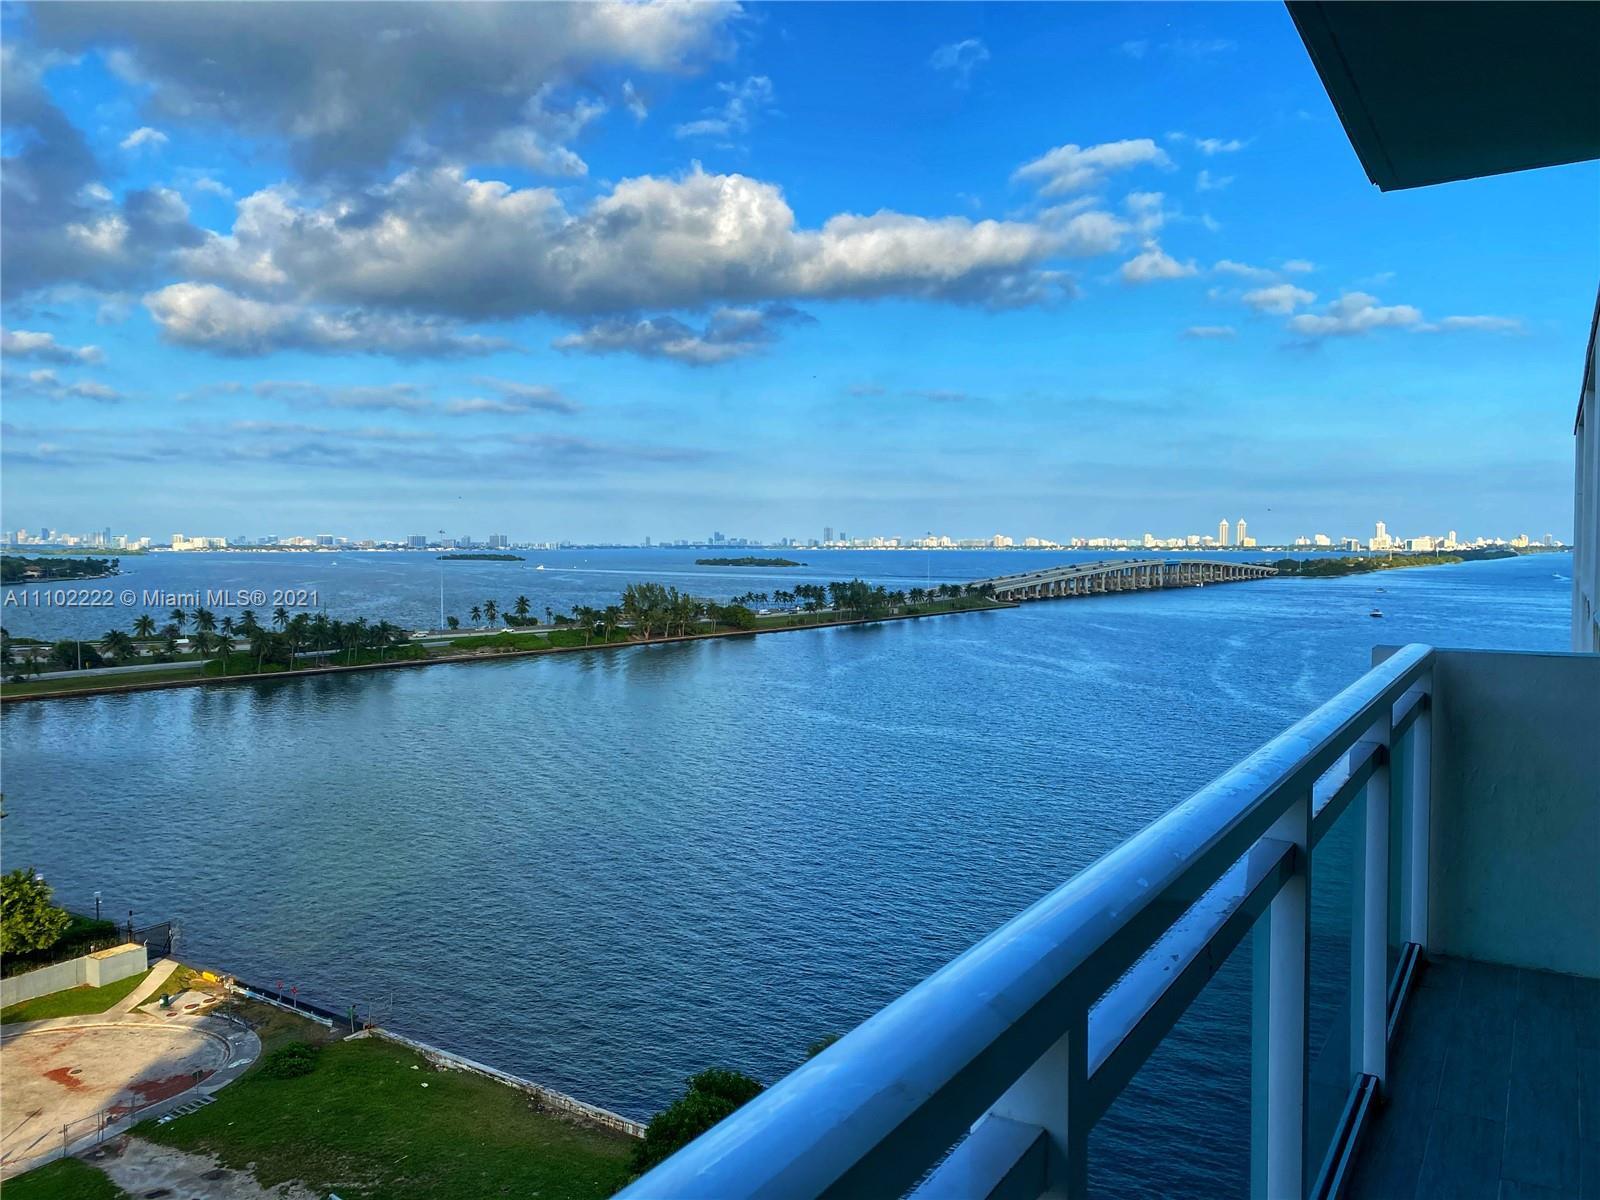 COMPLETELY REMODELED WATERFRONT STUDIO WITH BREATHTAKING VIEWS OF BISCAYNE BAY IN THE HEART OF EDGEW